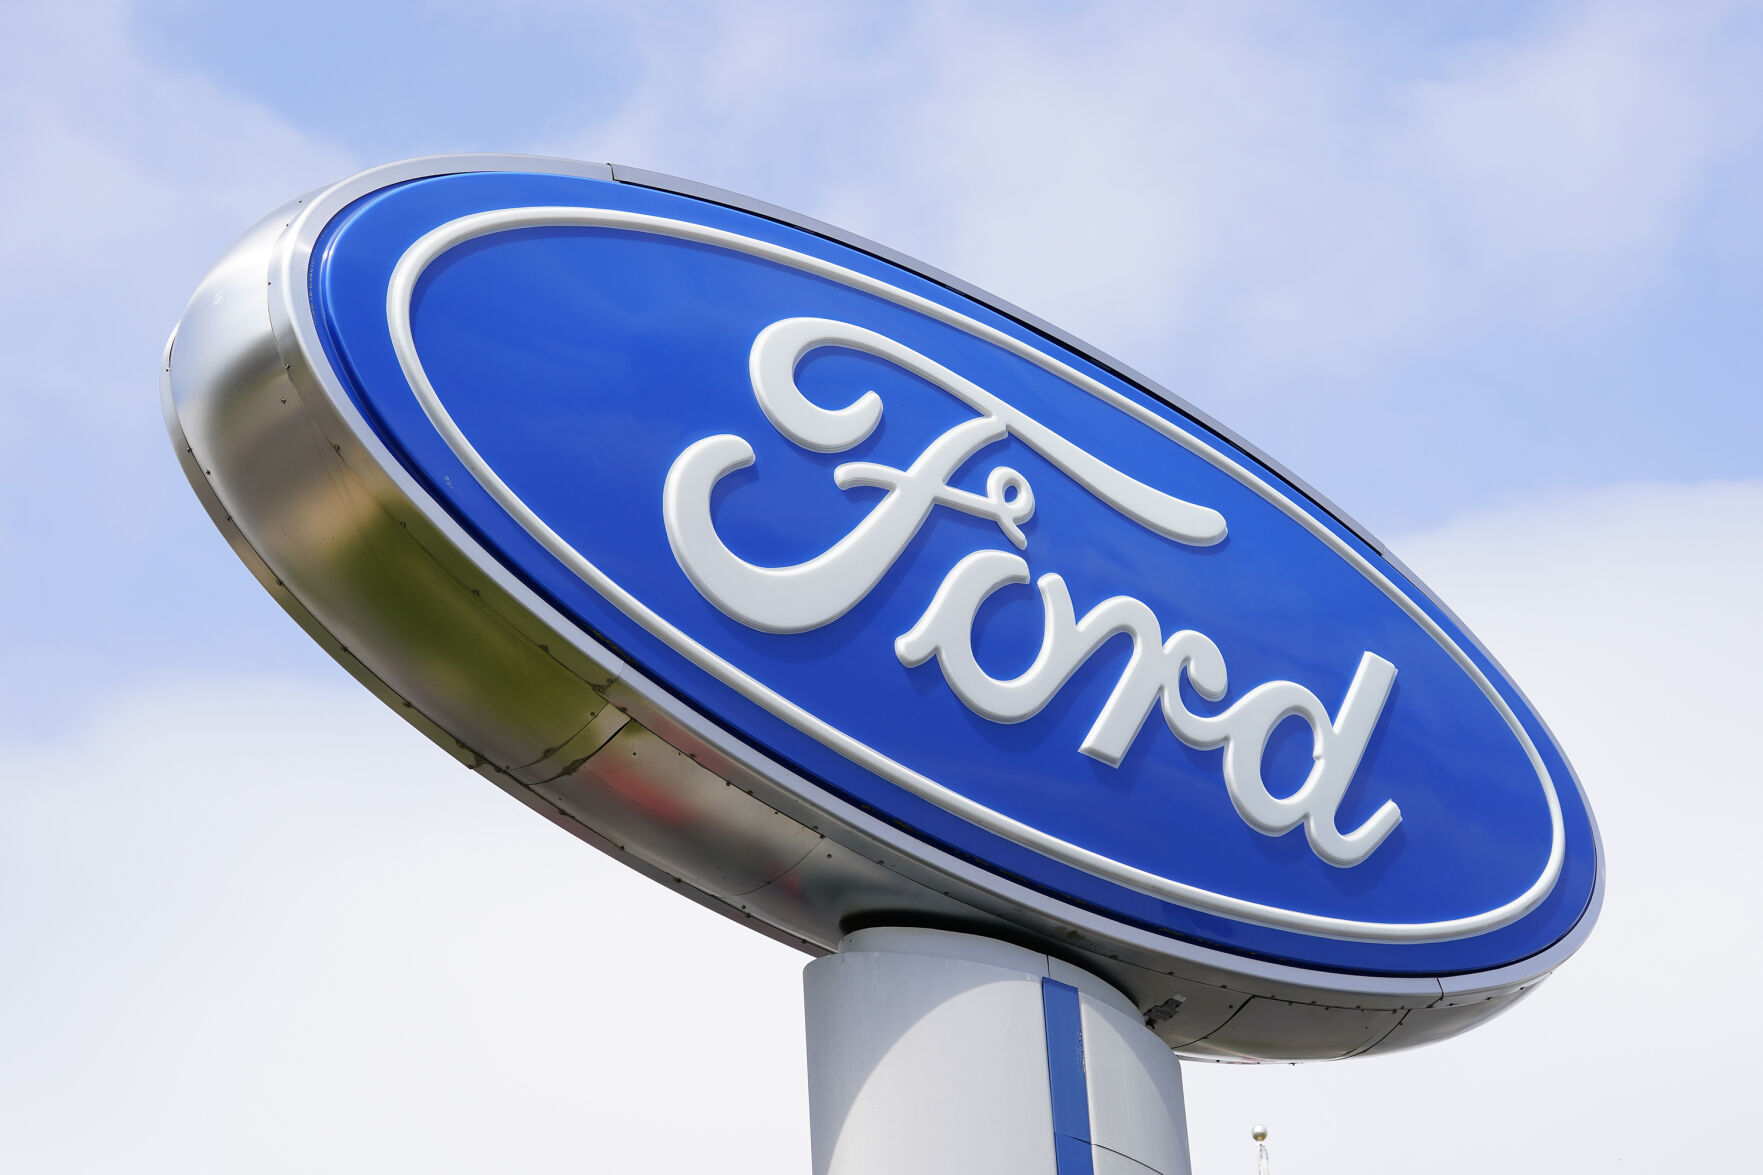 <p>FILE - A Ford sign is shown at a dealership in Springfield, Pa., Tuesday, April 26, 2022. Ford Motor Co. is recalling certain 2004 to 2006 Ranger vehicles, Friday, May 5, 2023, because replacement front passenger air bag inflators may have been installed incorrectly. The National Highway Traffic Safety Administration said in a letter that the recall includes 231,942 vehicles. (AP Photo/Matt Rourke, File)</p>   PHOTO CREDIT: Matt Rourke 